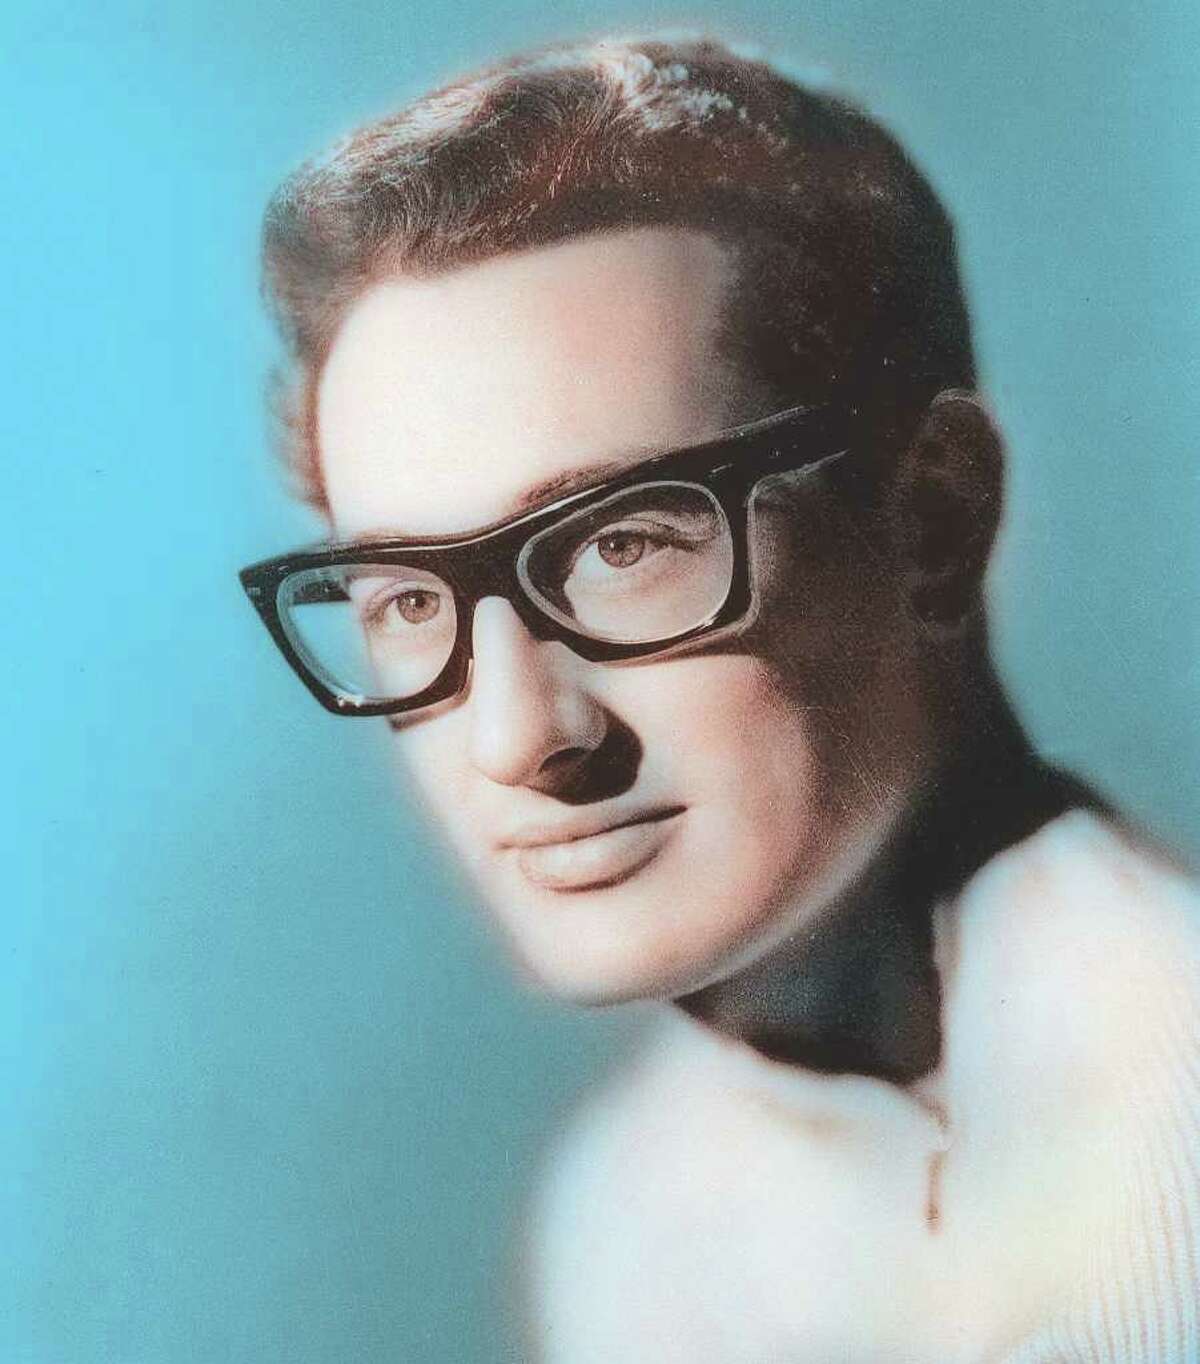 last song buddy holly played